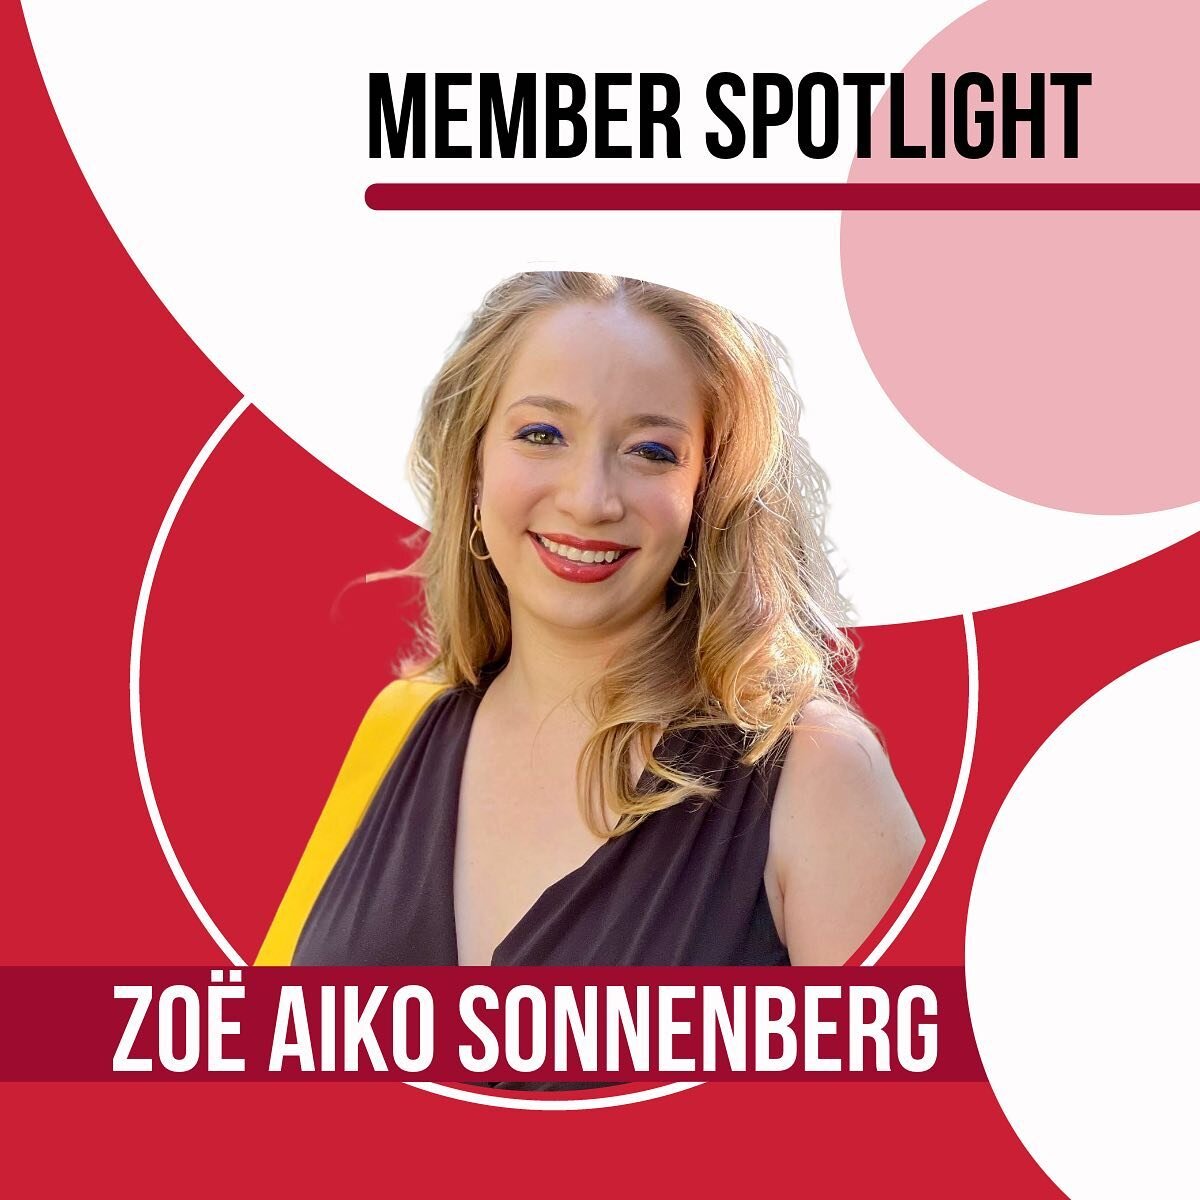 This month&rsquo;s SIE member spotlight is Zo&euml; Aiko Sonnenberg. Read more about her in our October newsletter. Link in bio! ⬆️

If you haven't already, make sure to subscribe to our monthly newsletter. It's a great way to get info about our upco